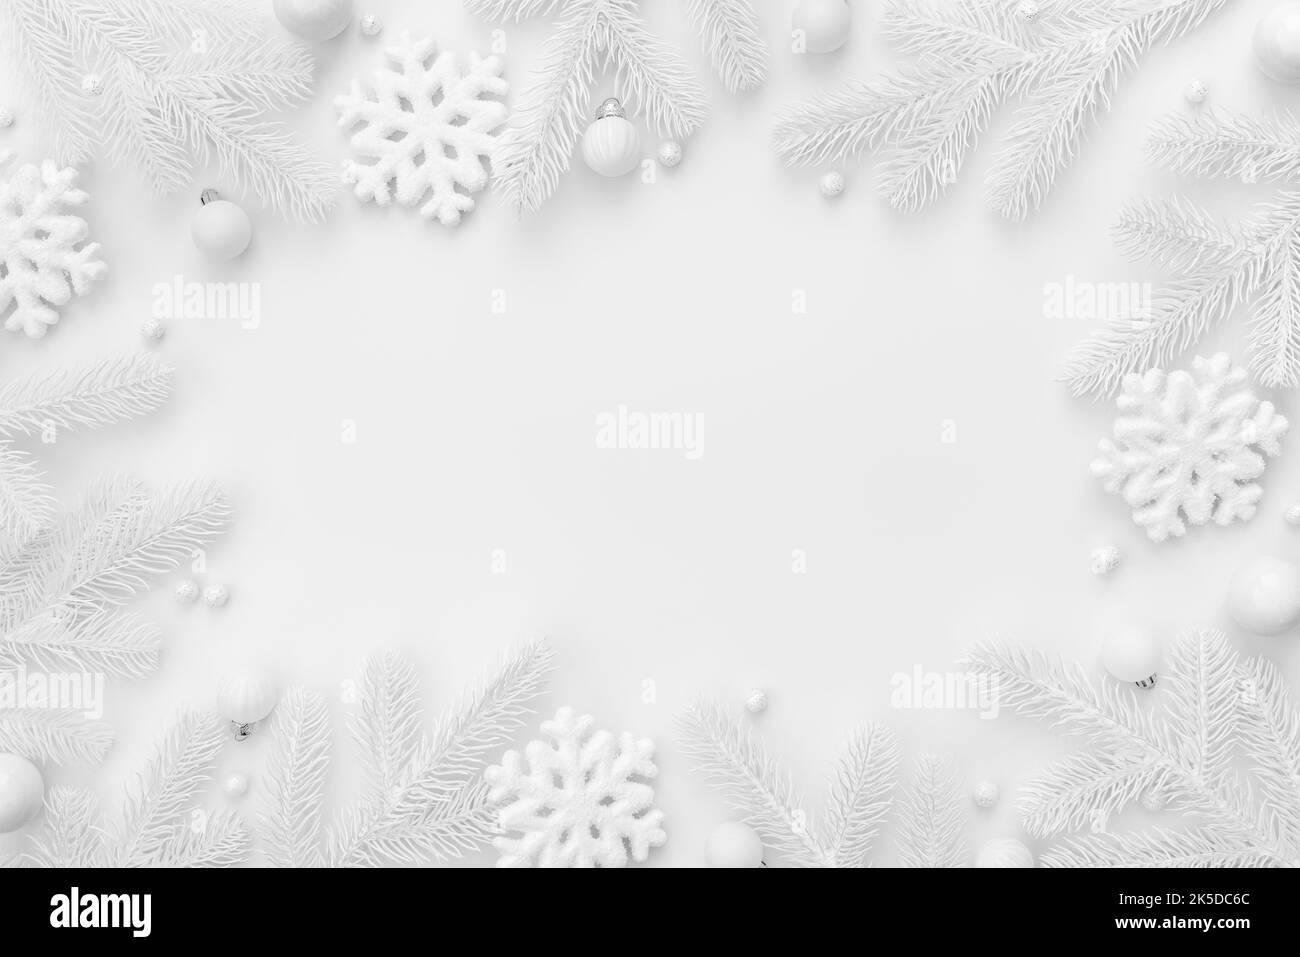 White Christmas background with frame and copy space Stock Photo